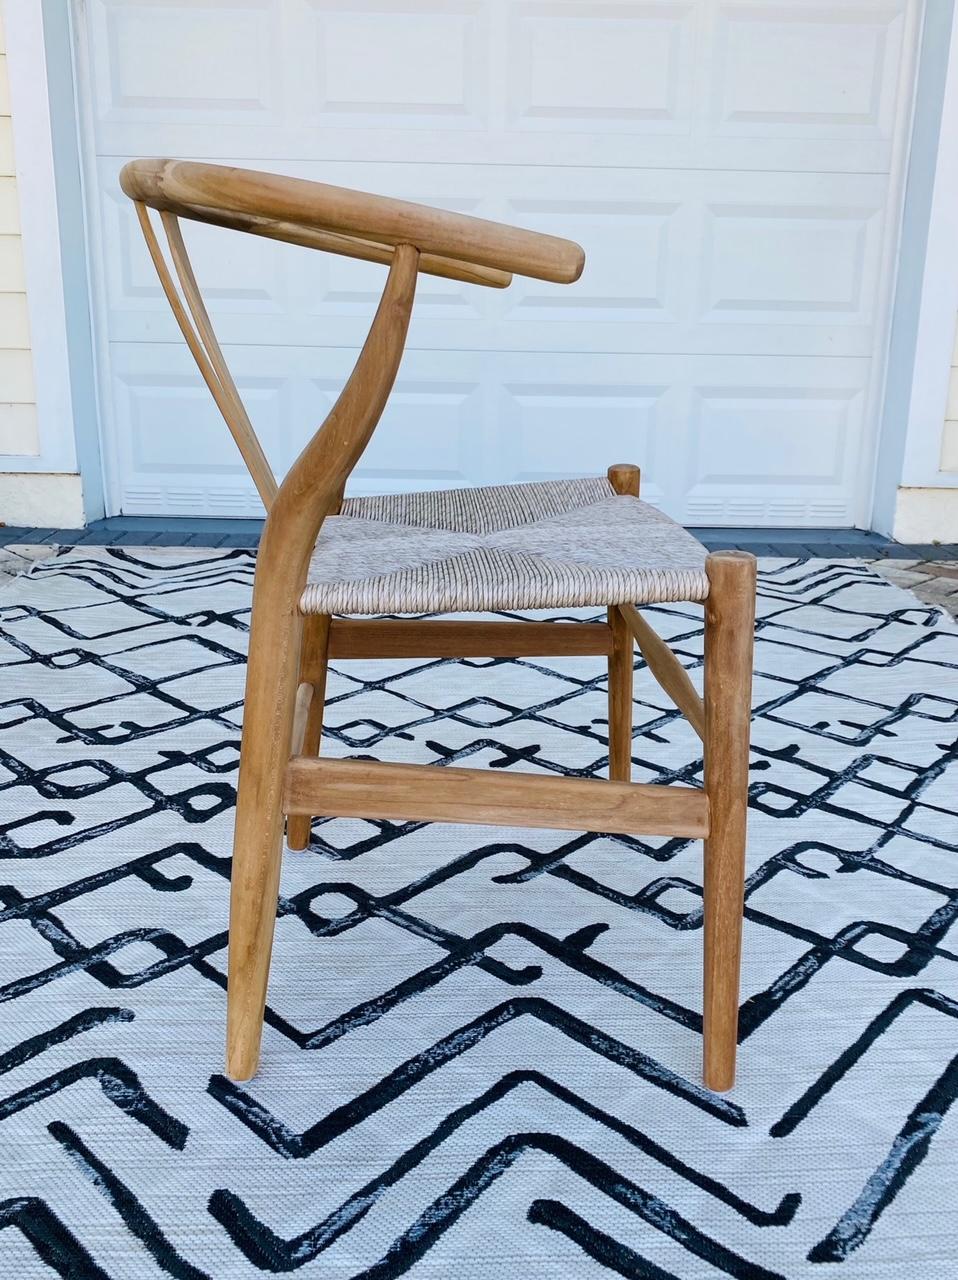 Dutch Vintage Danish Modern Chair in Natural Teak Wood with Handwoven Seat